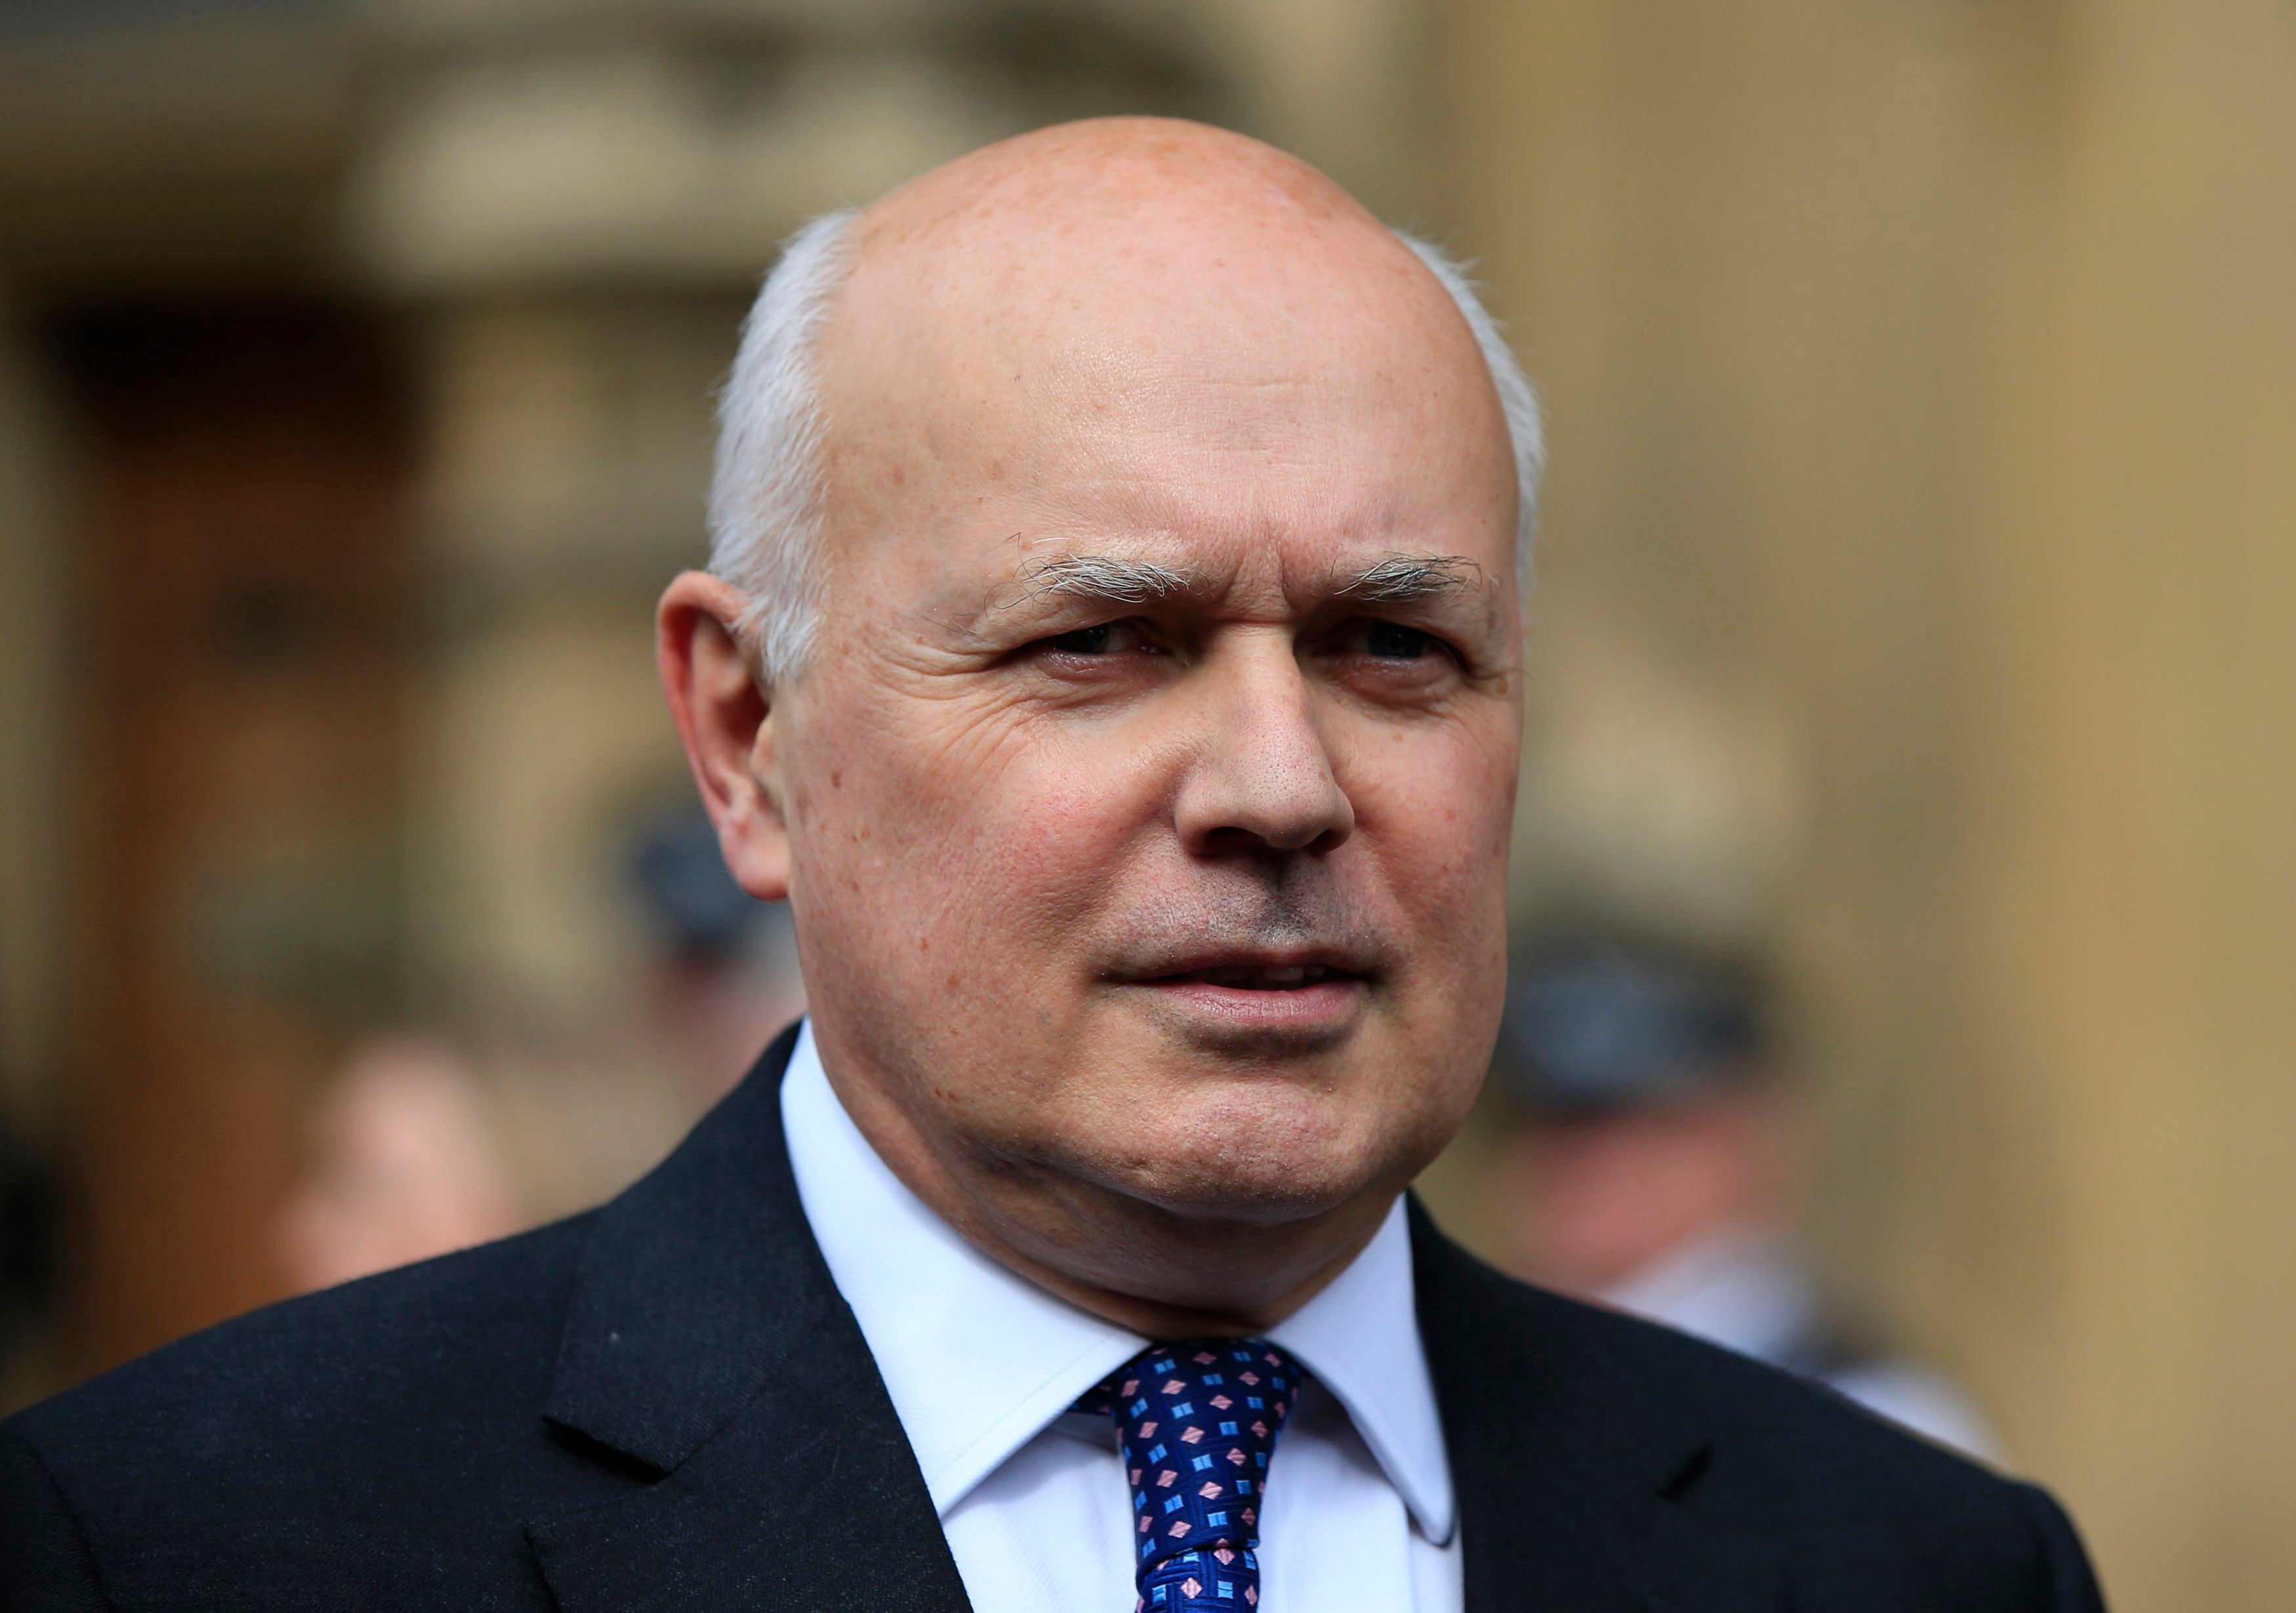 A man has appeared in court charged with assaulting former Tory party leader Sir Iain Duncan Smith